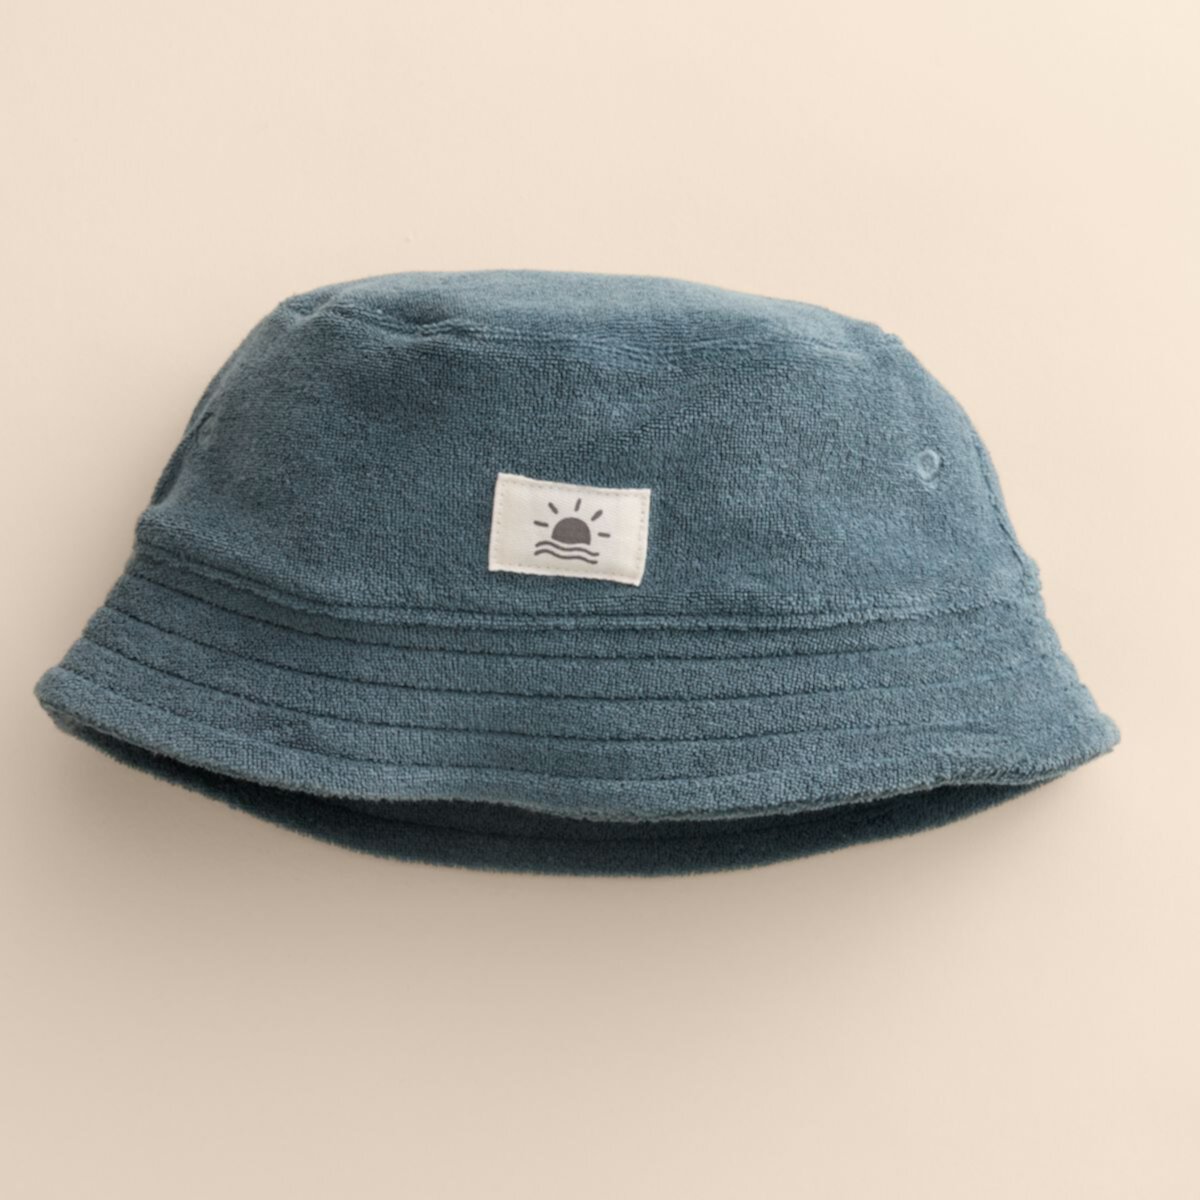 Baby & Toddler Little Co. by Lauren Conrad Terry Cloth Bucket Hat Little Co. by Lauren Conrad